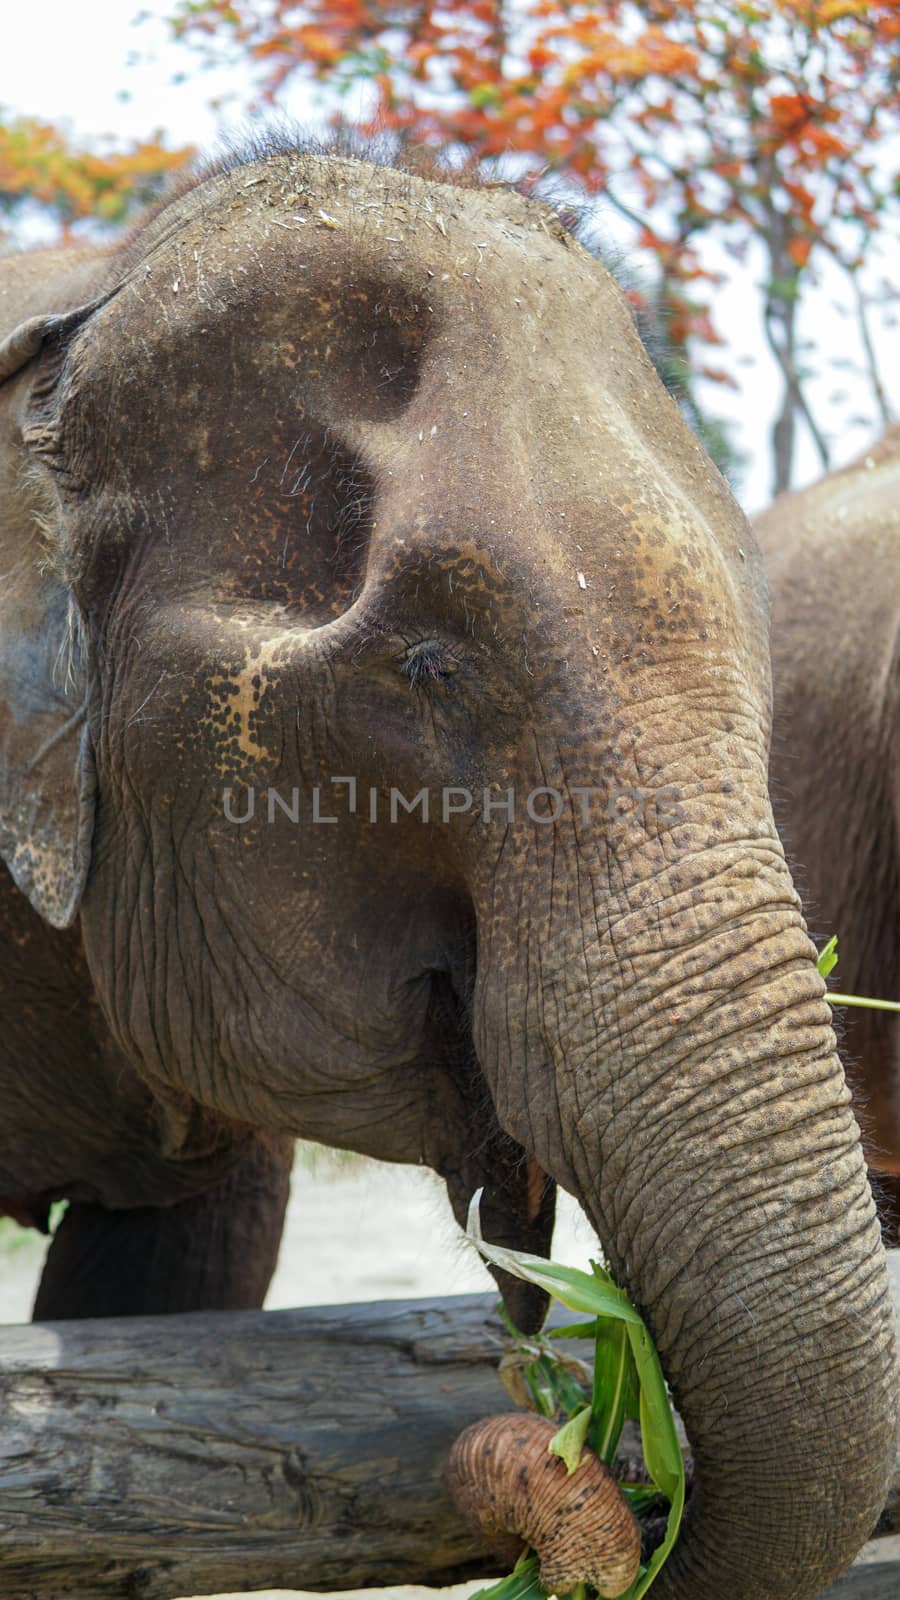 Close up of Elephants trunk while they are feeding on sugar cane and bamboo in Elephant Care Sanctuary, Mae Tang, Chiang Mai province, Thailand. by sonandonures